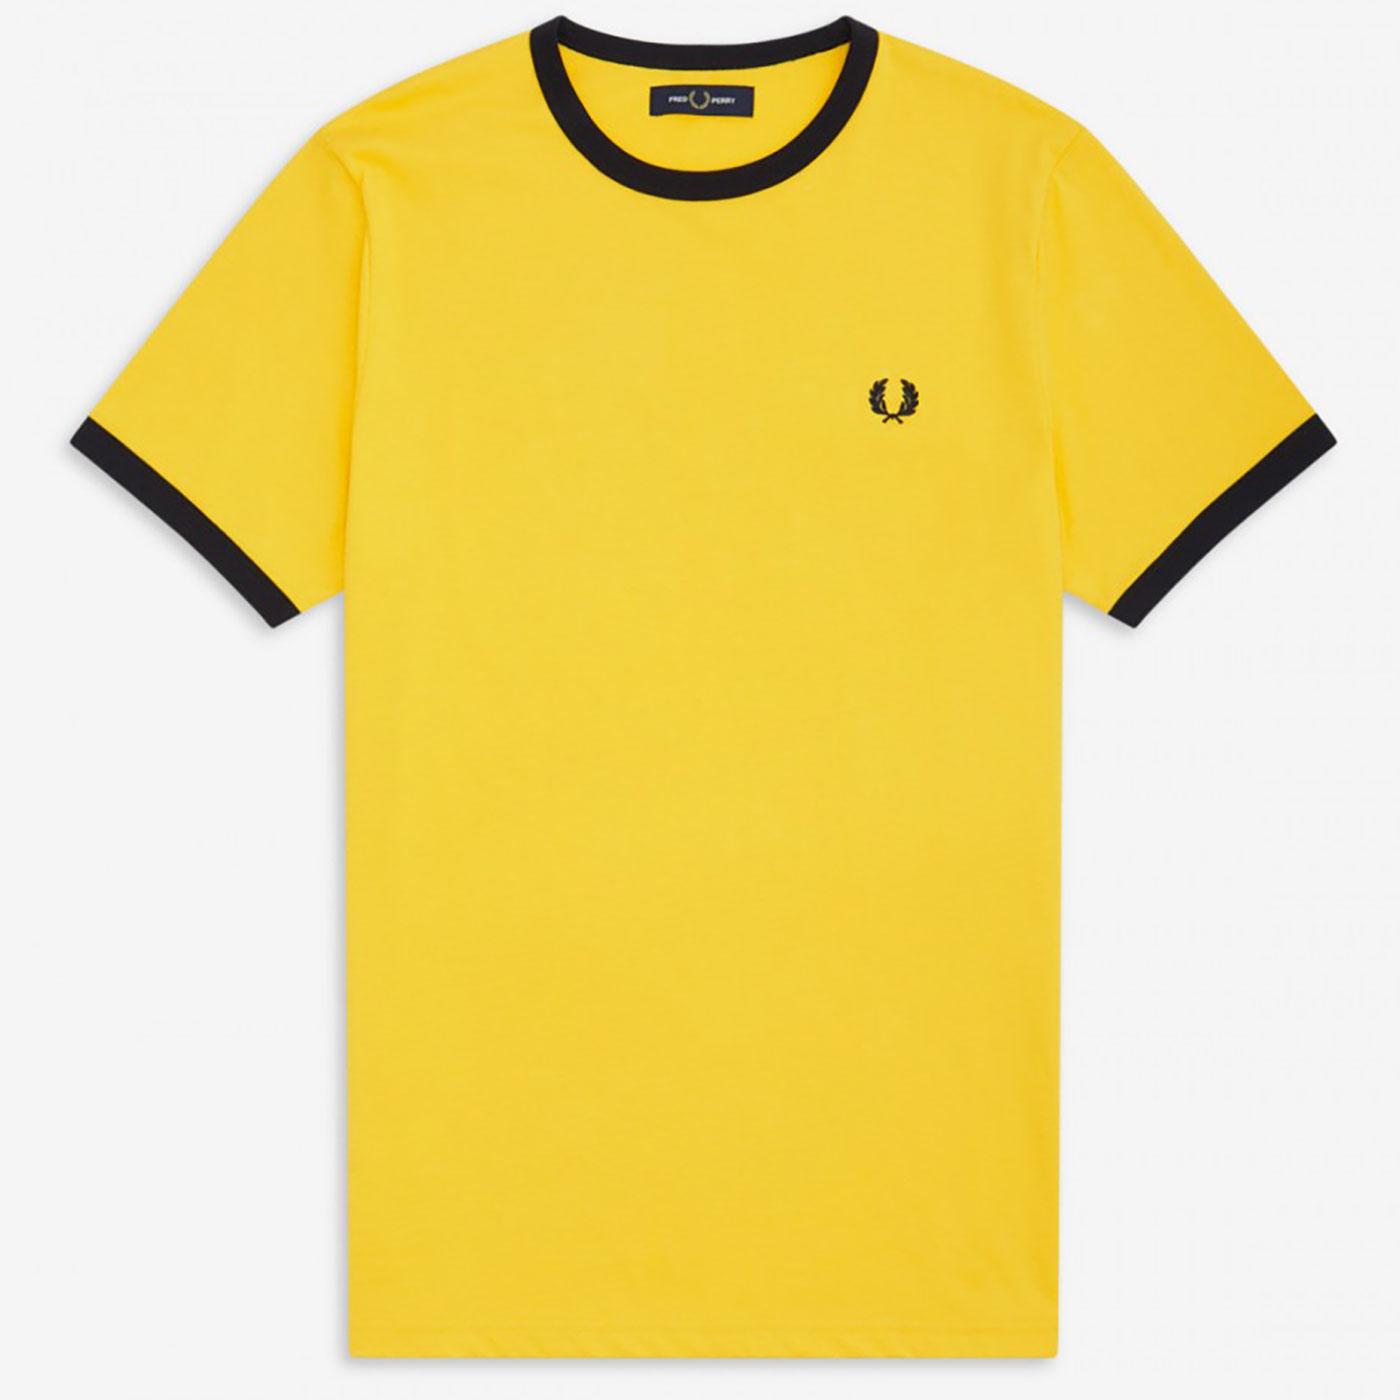 FRED PERRY Retro Mod Crew Neck Ringer Tee SUNGLOW